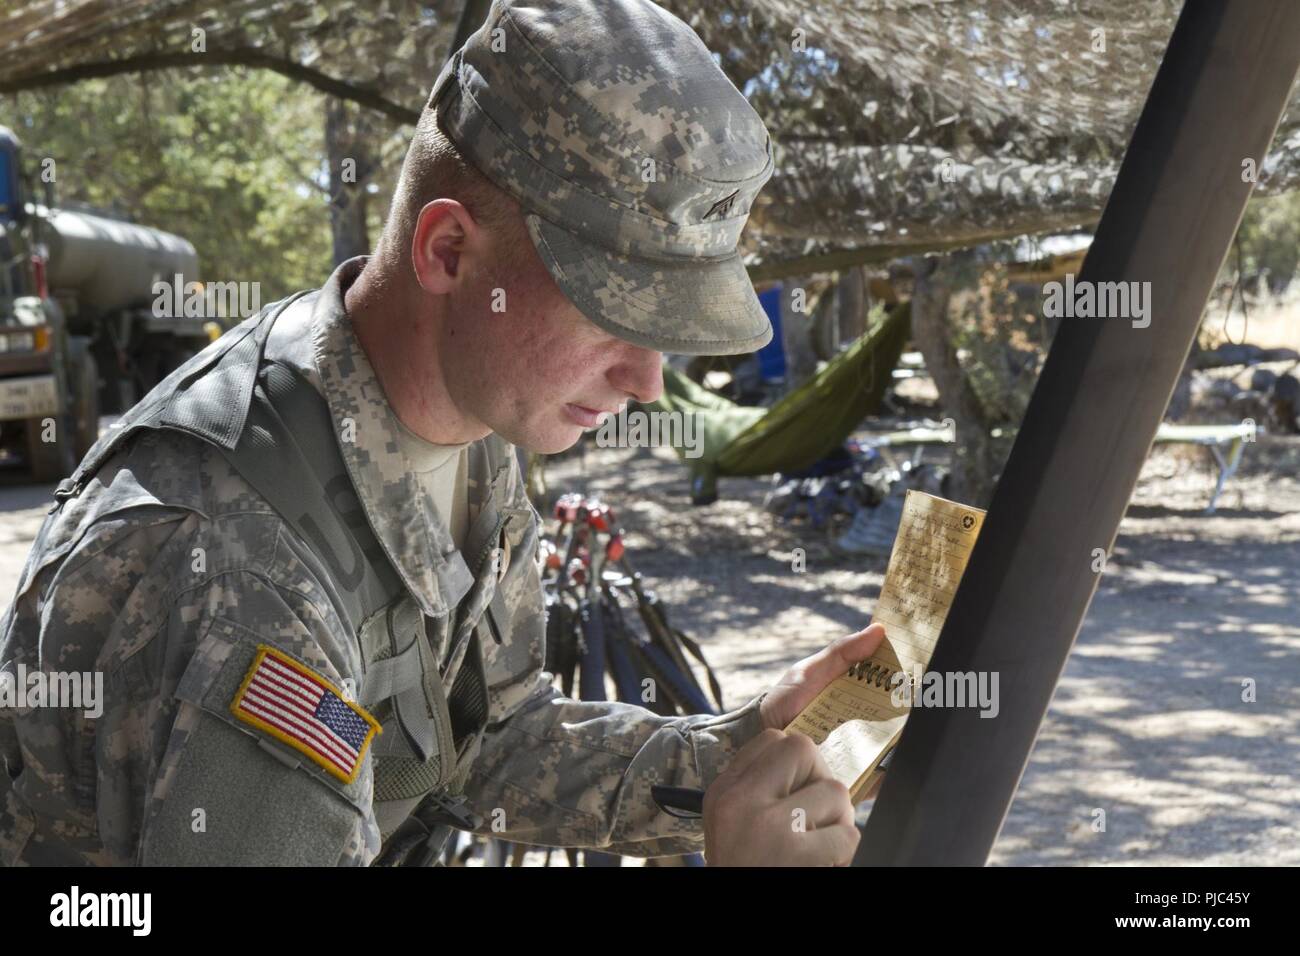 FORT HUNTER LIGGETT-- U.S. Army Sgt. Tobias Ropp of the 348th Transportation Company records key information whi teaching a land navigation course during the 91st Training Division's Combat Support Training Exercise (CSTX 91-18-01) on July 11, 2018 in Ft. Hunter Liggett, California. The CSTX 91-18-01 ensures America’s Army Reserve units are trained to deploy bringing capable, combat-ready, and lethal firepower in support of the Army and our joint partners anywhere in the world. Stock Photo